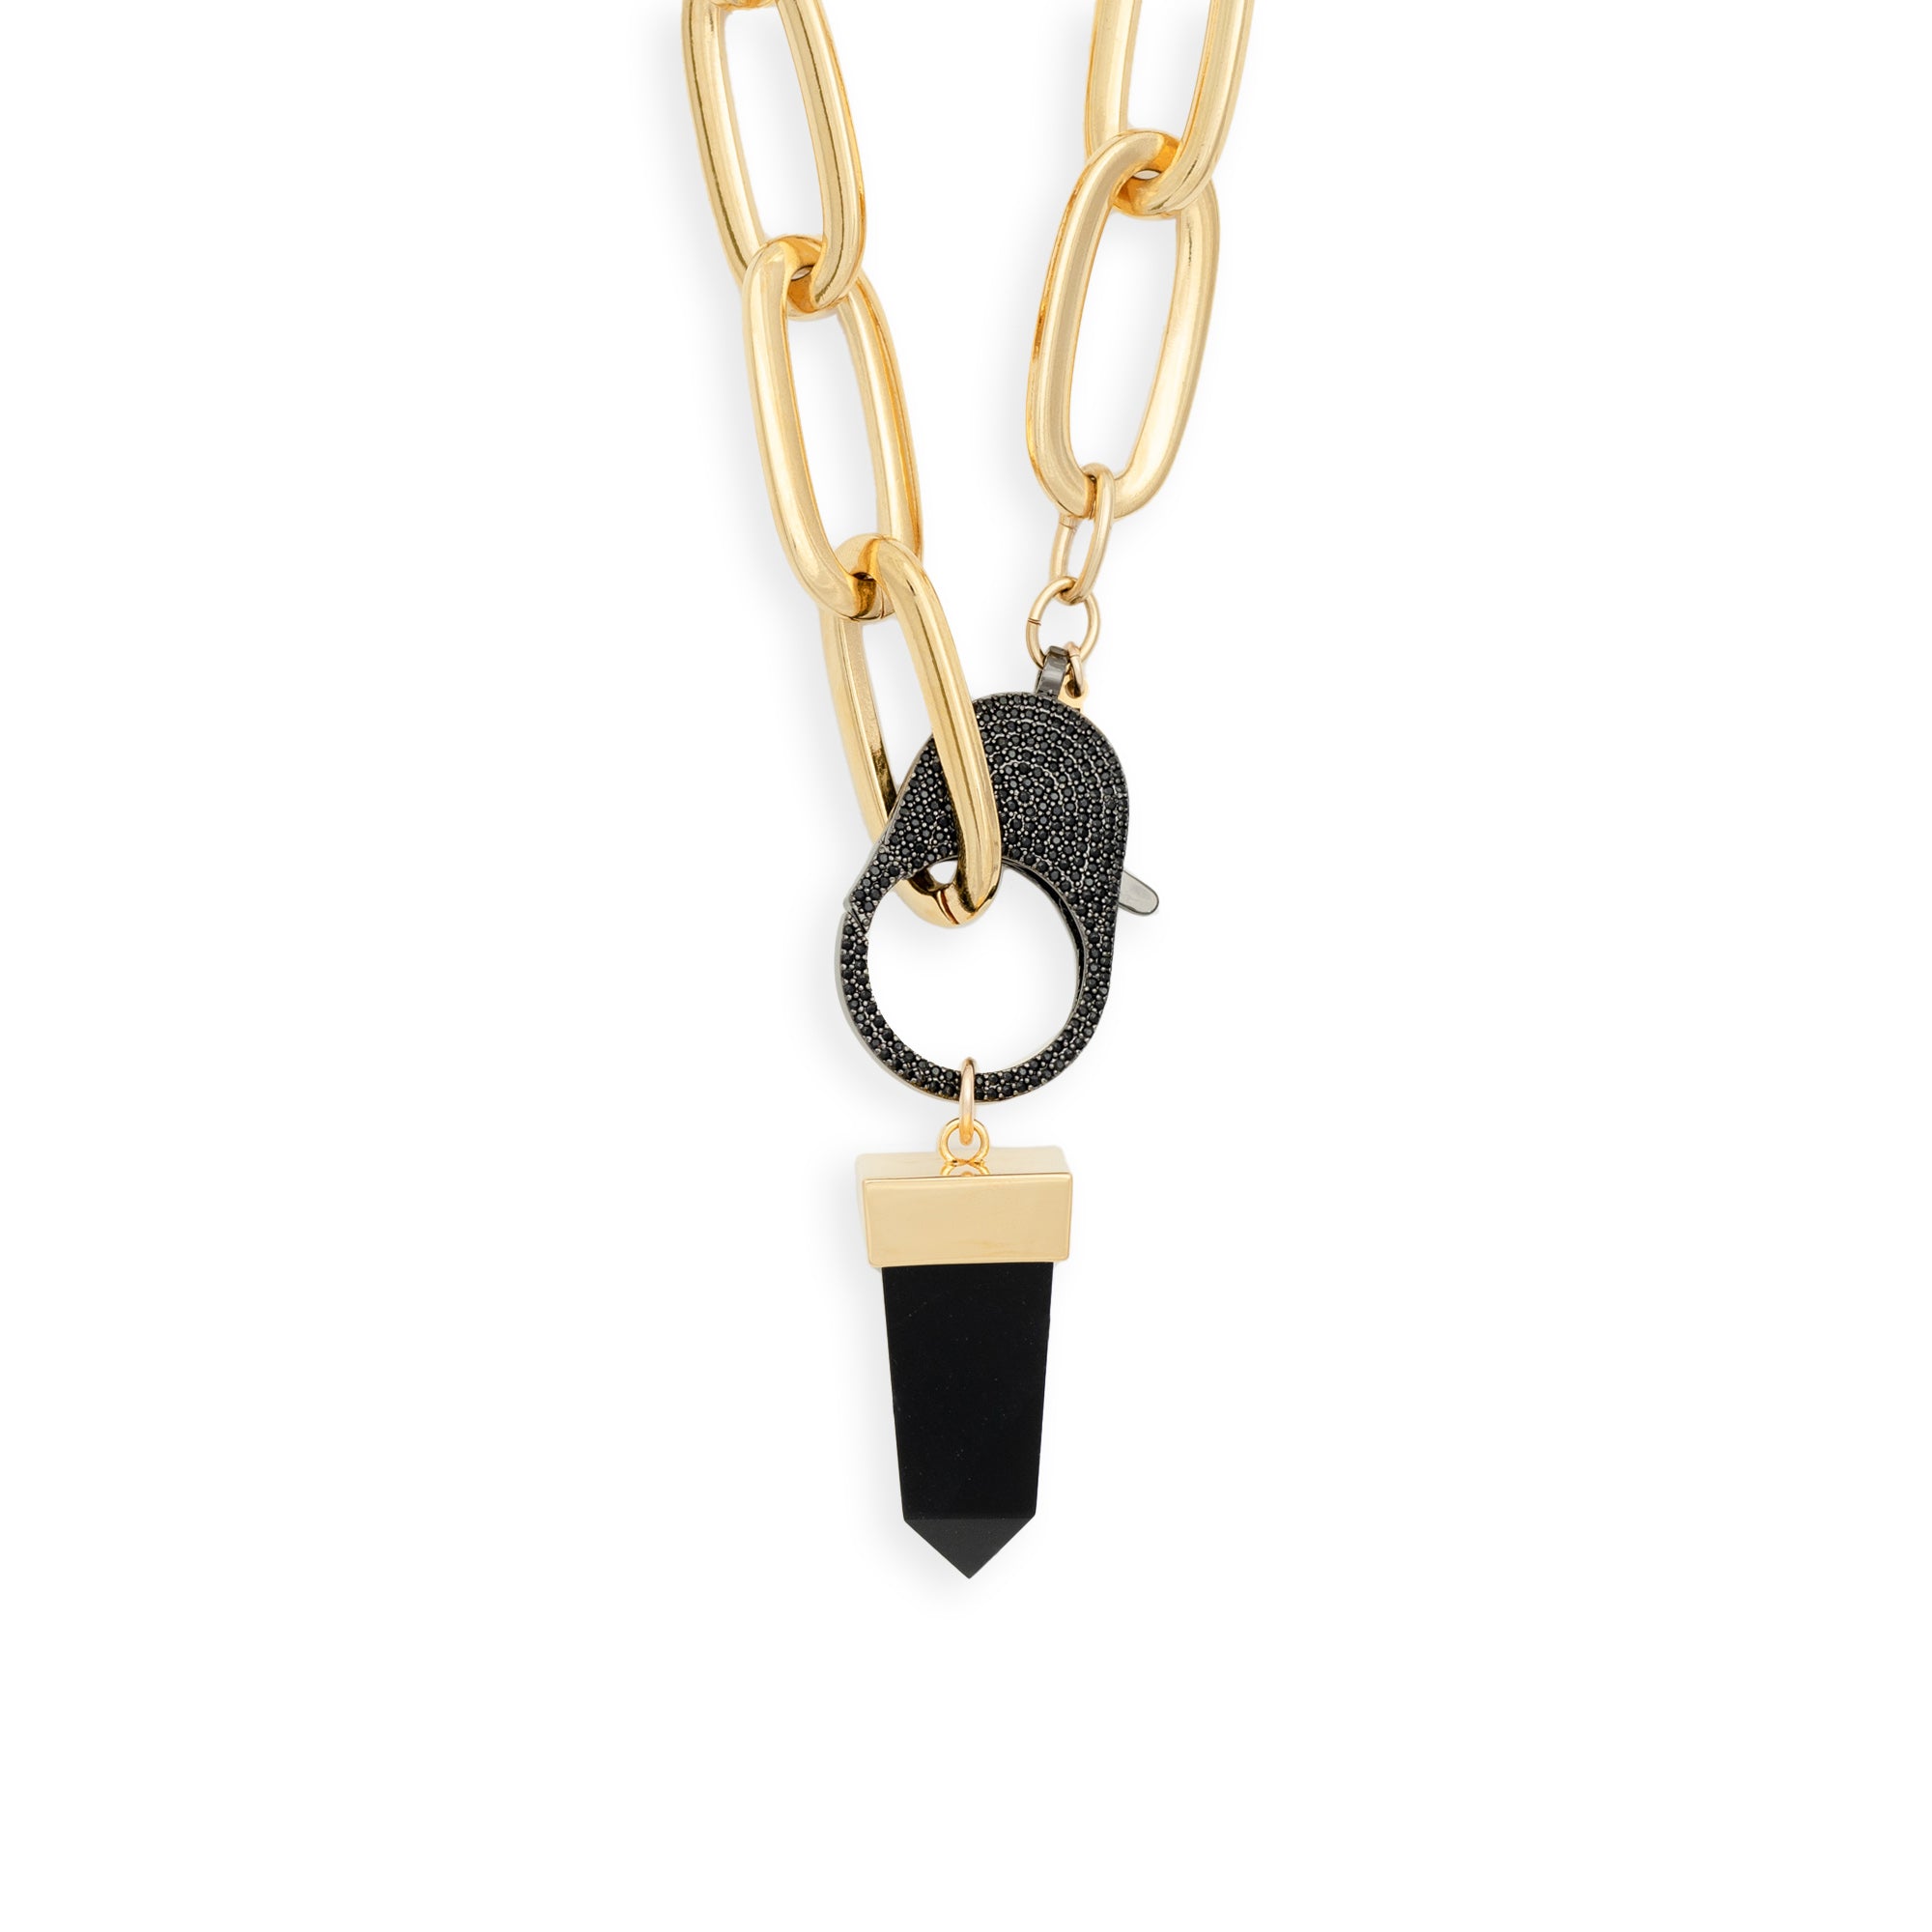 Black Flex Choker with Onyx Pendant by Erin Fader Jewelry